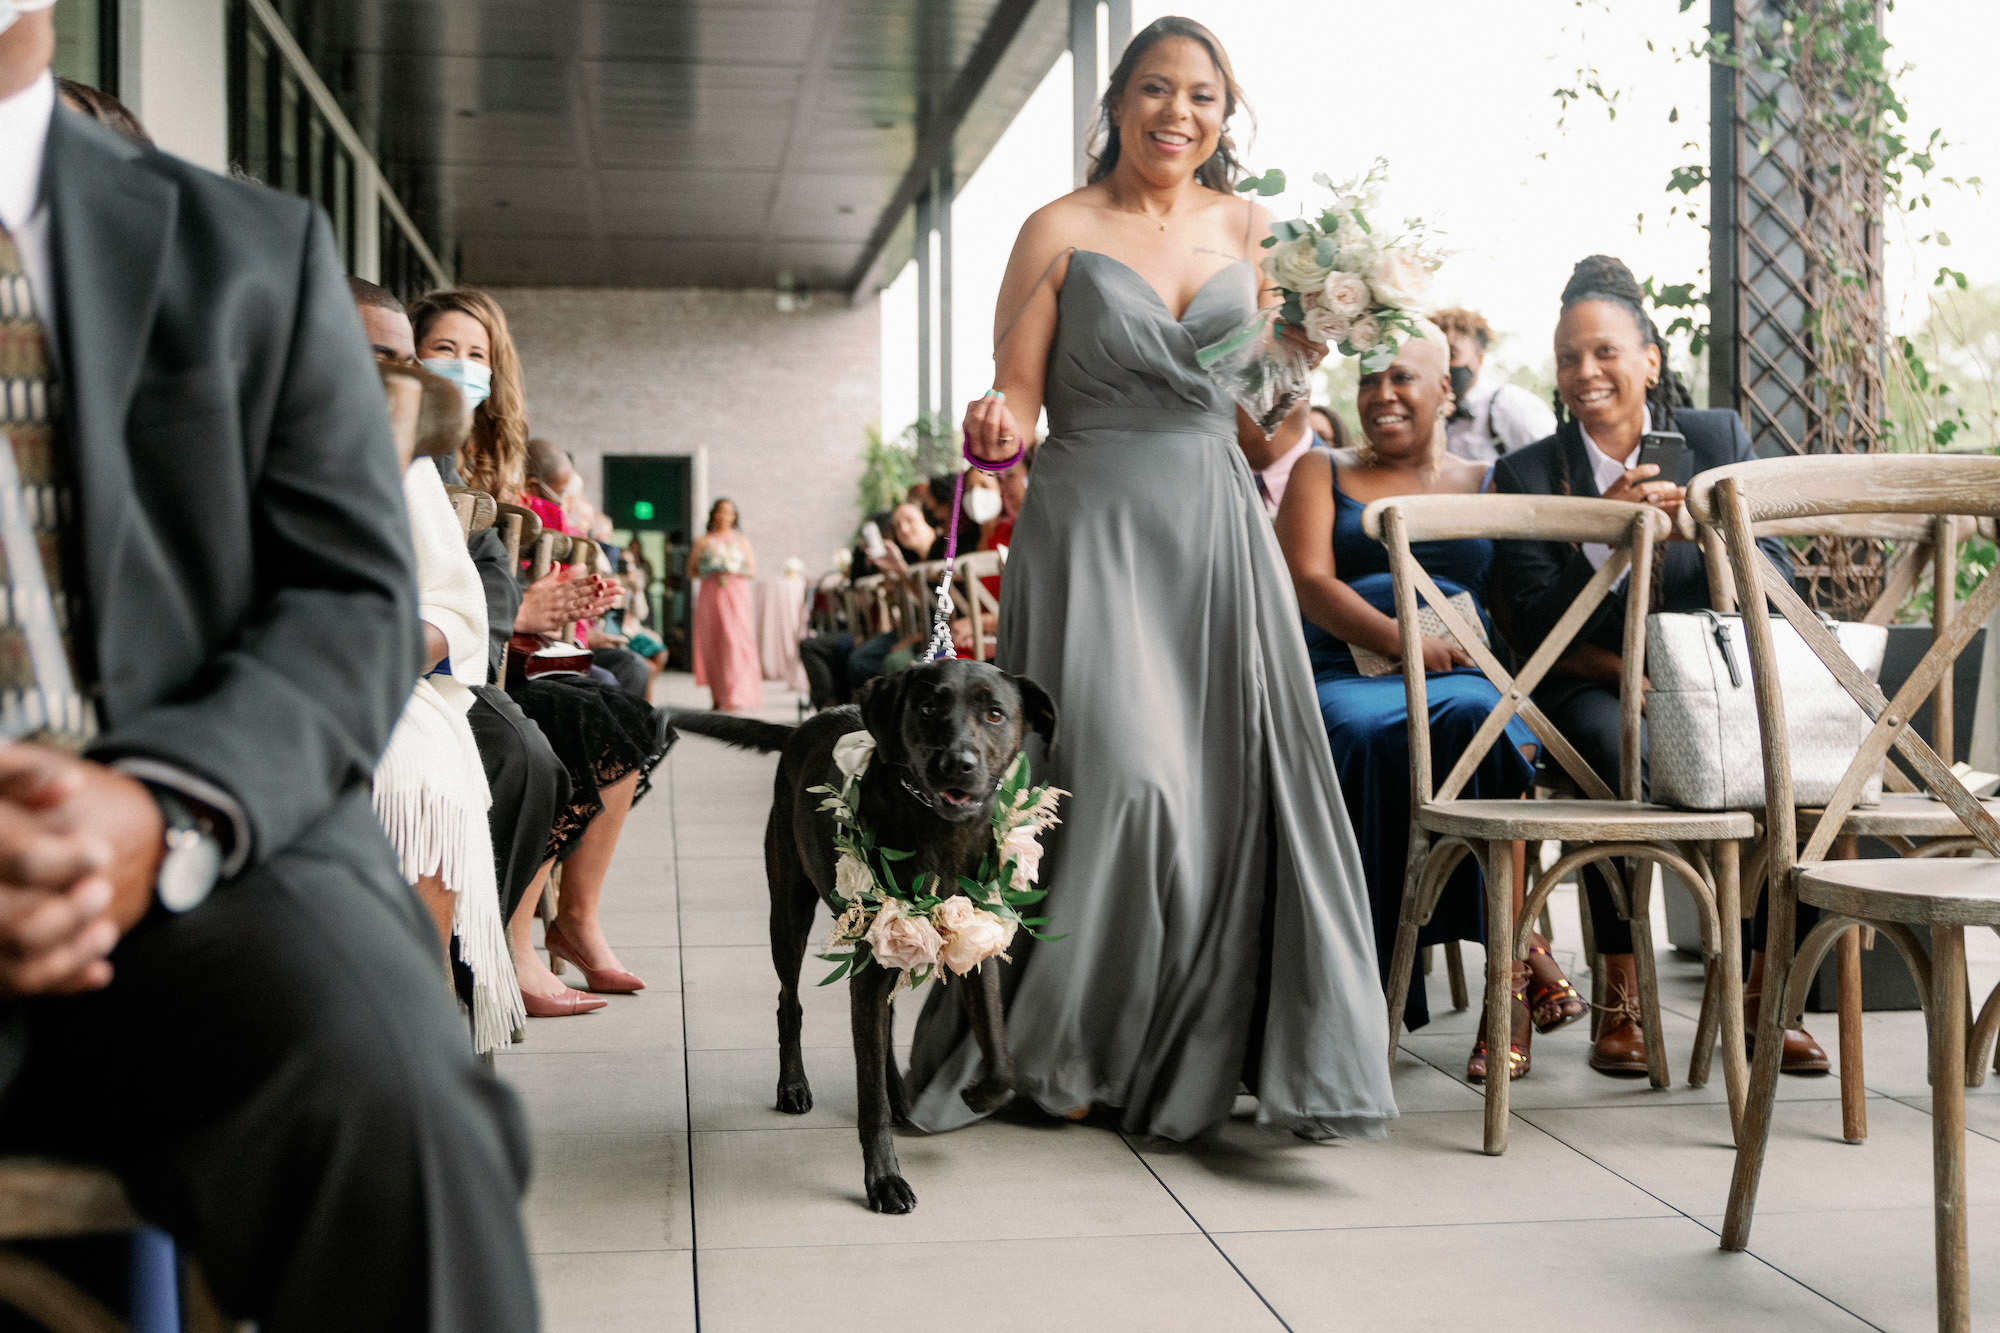 Vibrant Same Sex Lesbian Wedding Ceremony, Bridesmaid Wearing Gray Dress Walking Dog Ring Bearer Down the Ceremony Aisle | Tampa Bay Wedding Hair and Makeup IDBM Artistry | Wedding Photographer Dewitt for Love Photography